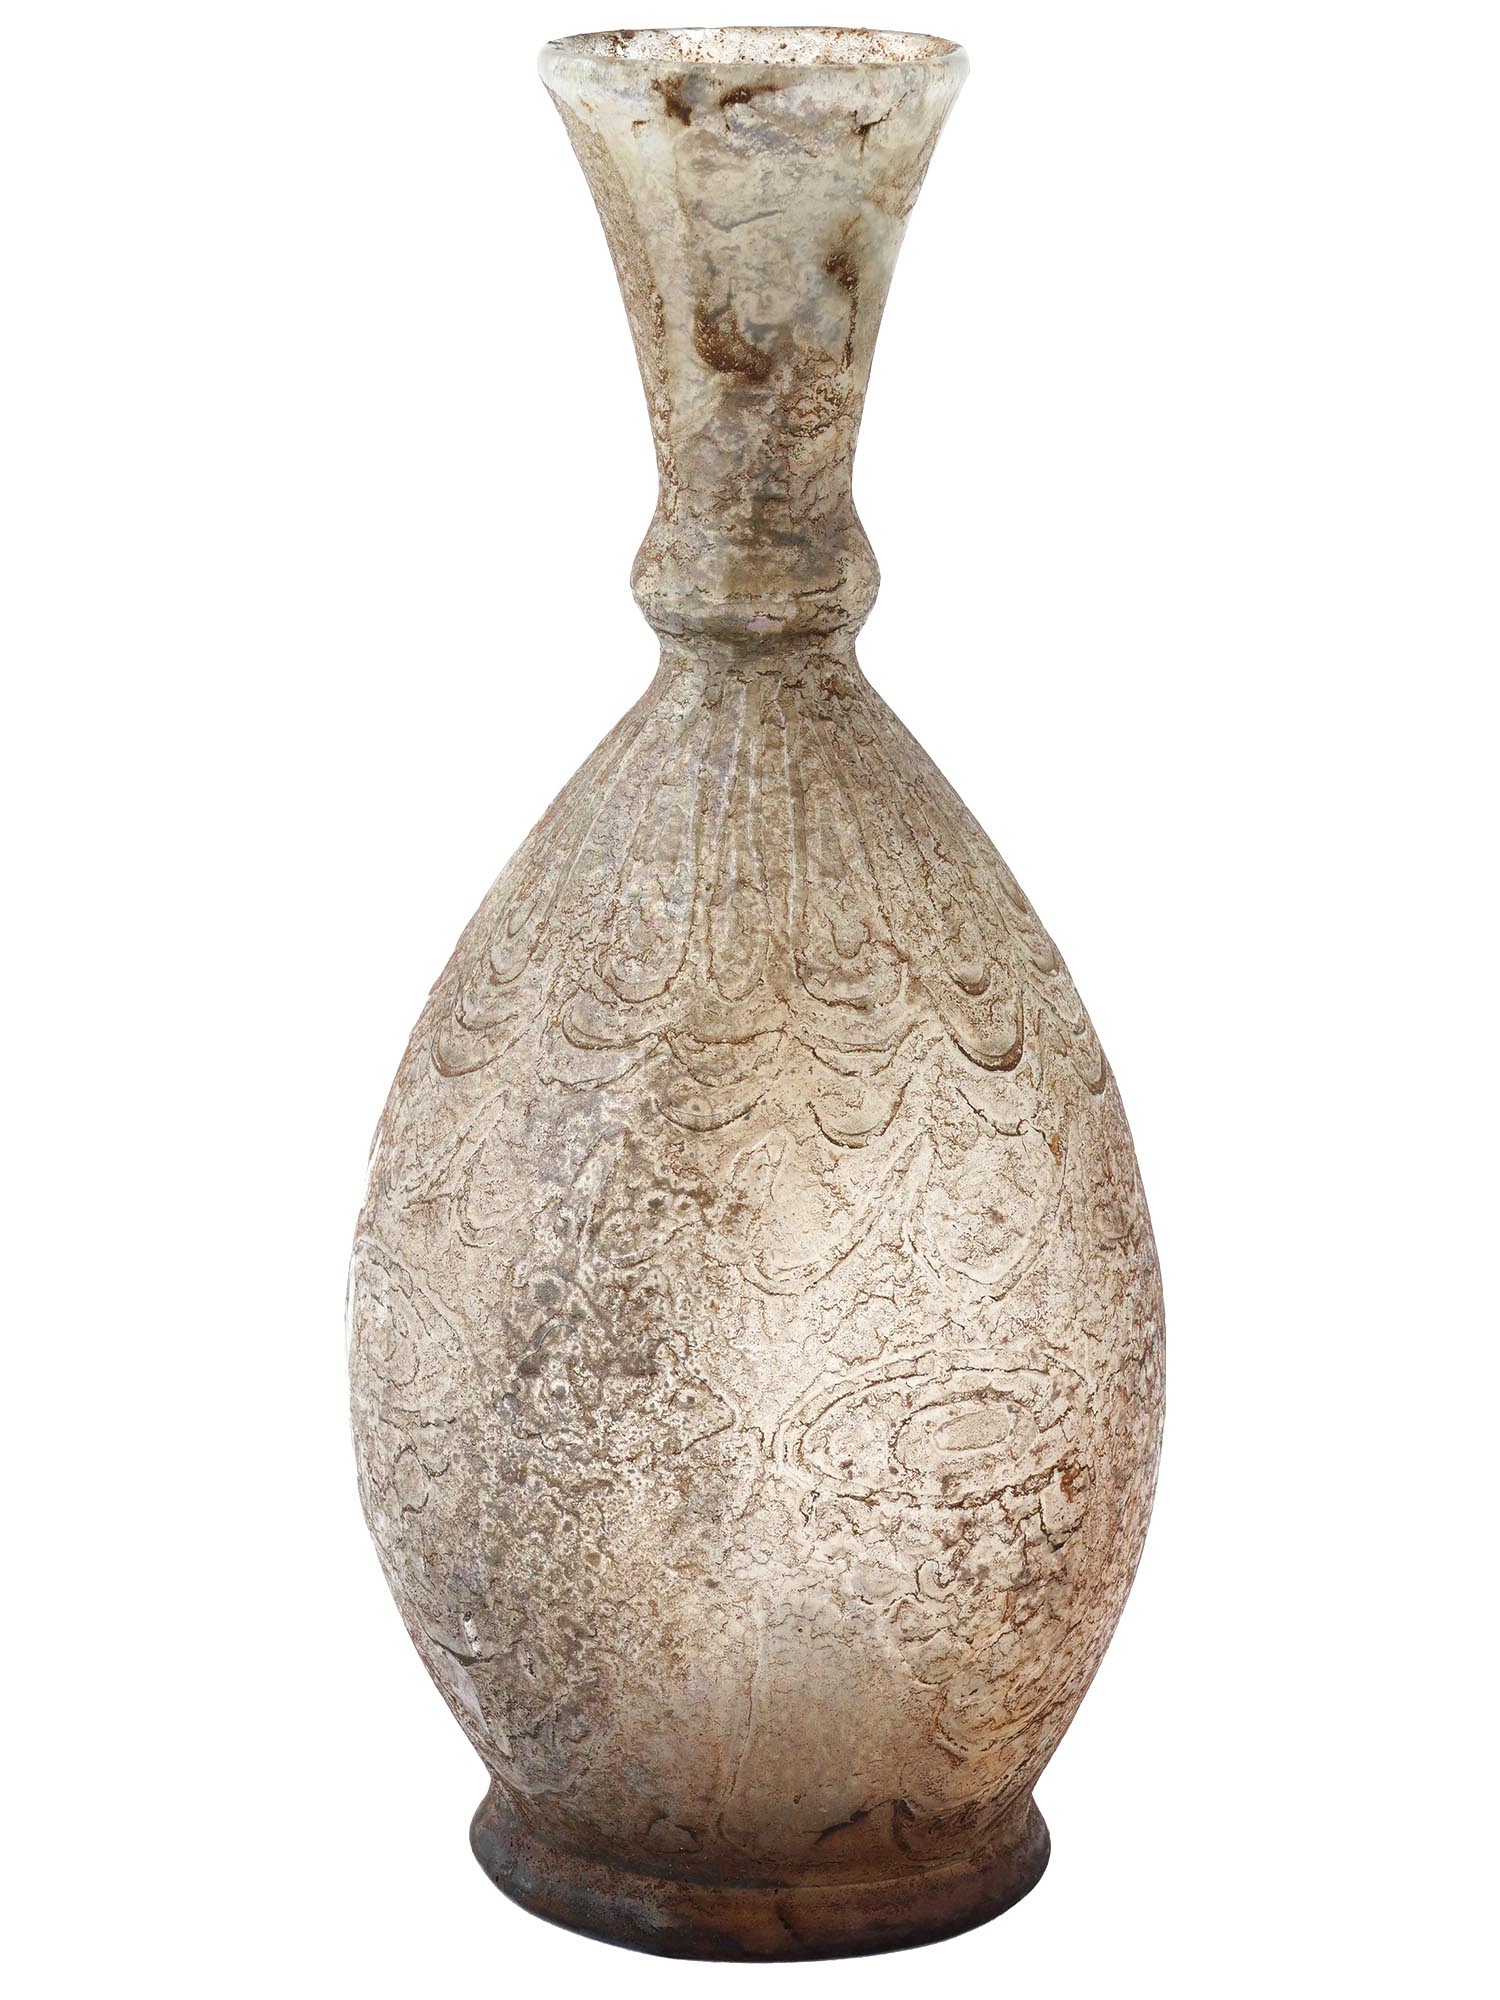 ANCIENT ISLAMIC GLASS BOTTLE WITH RELIEF DESIGNS PIC-0